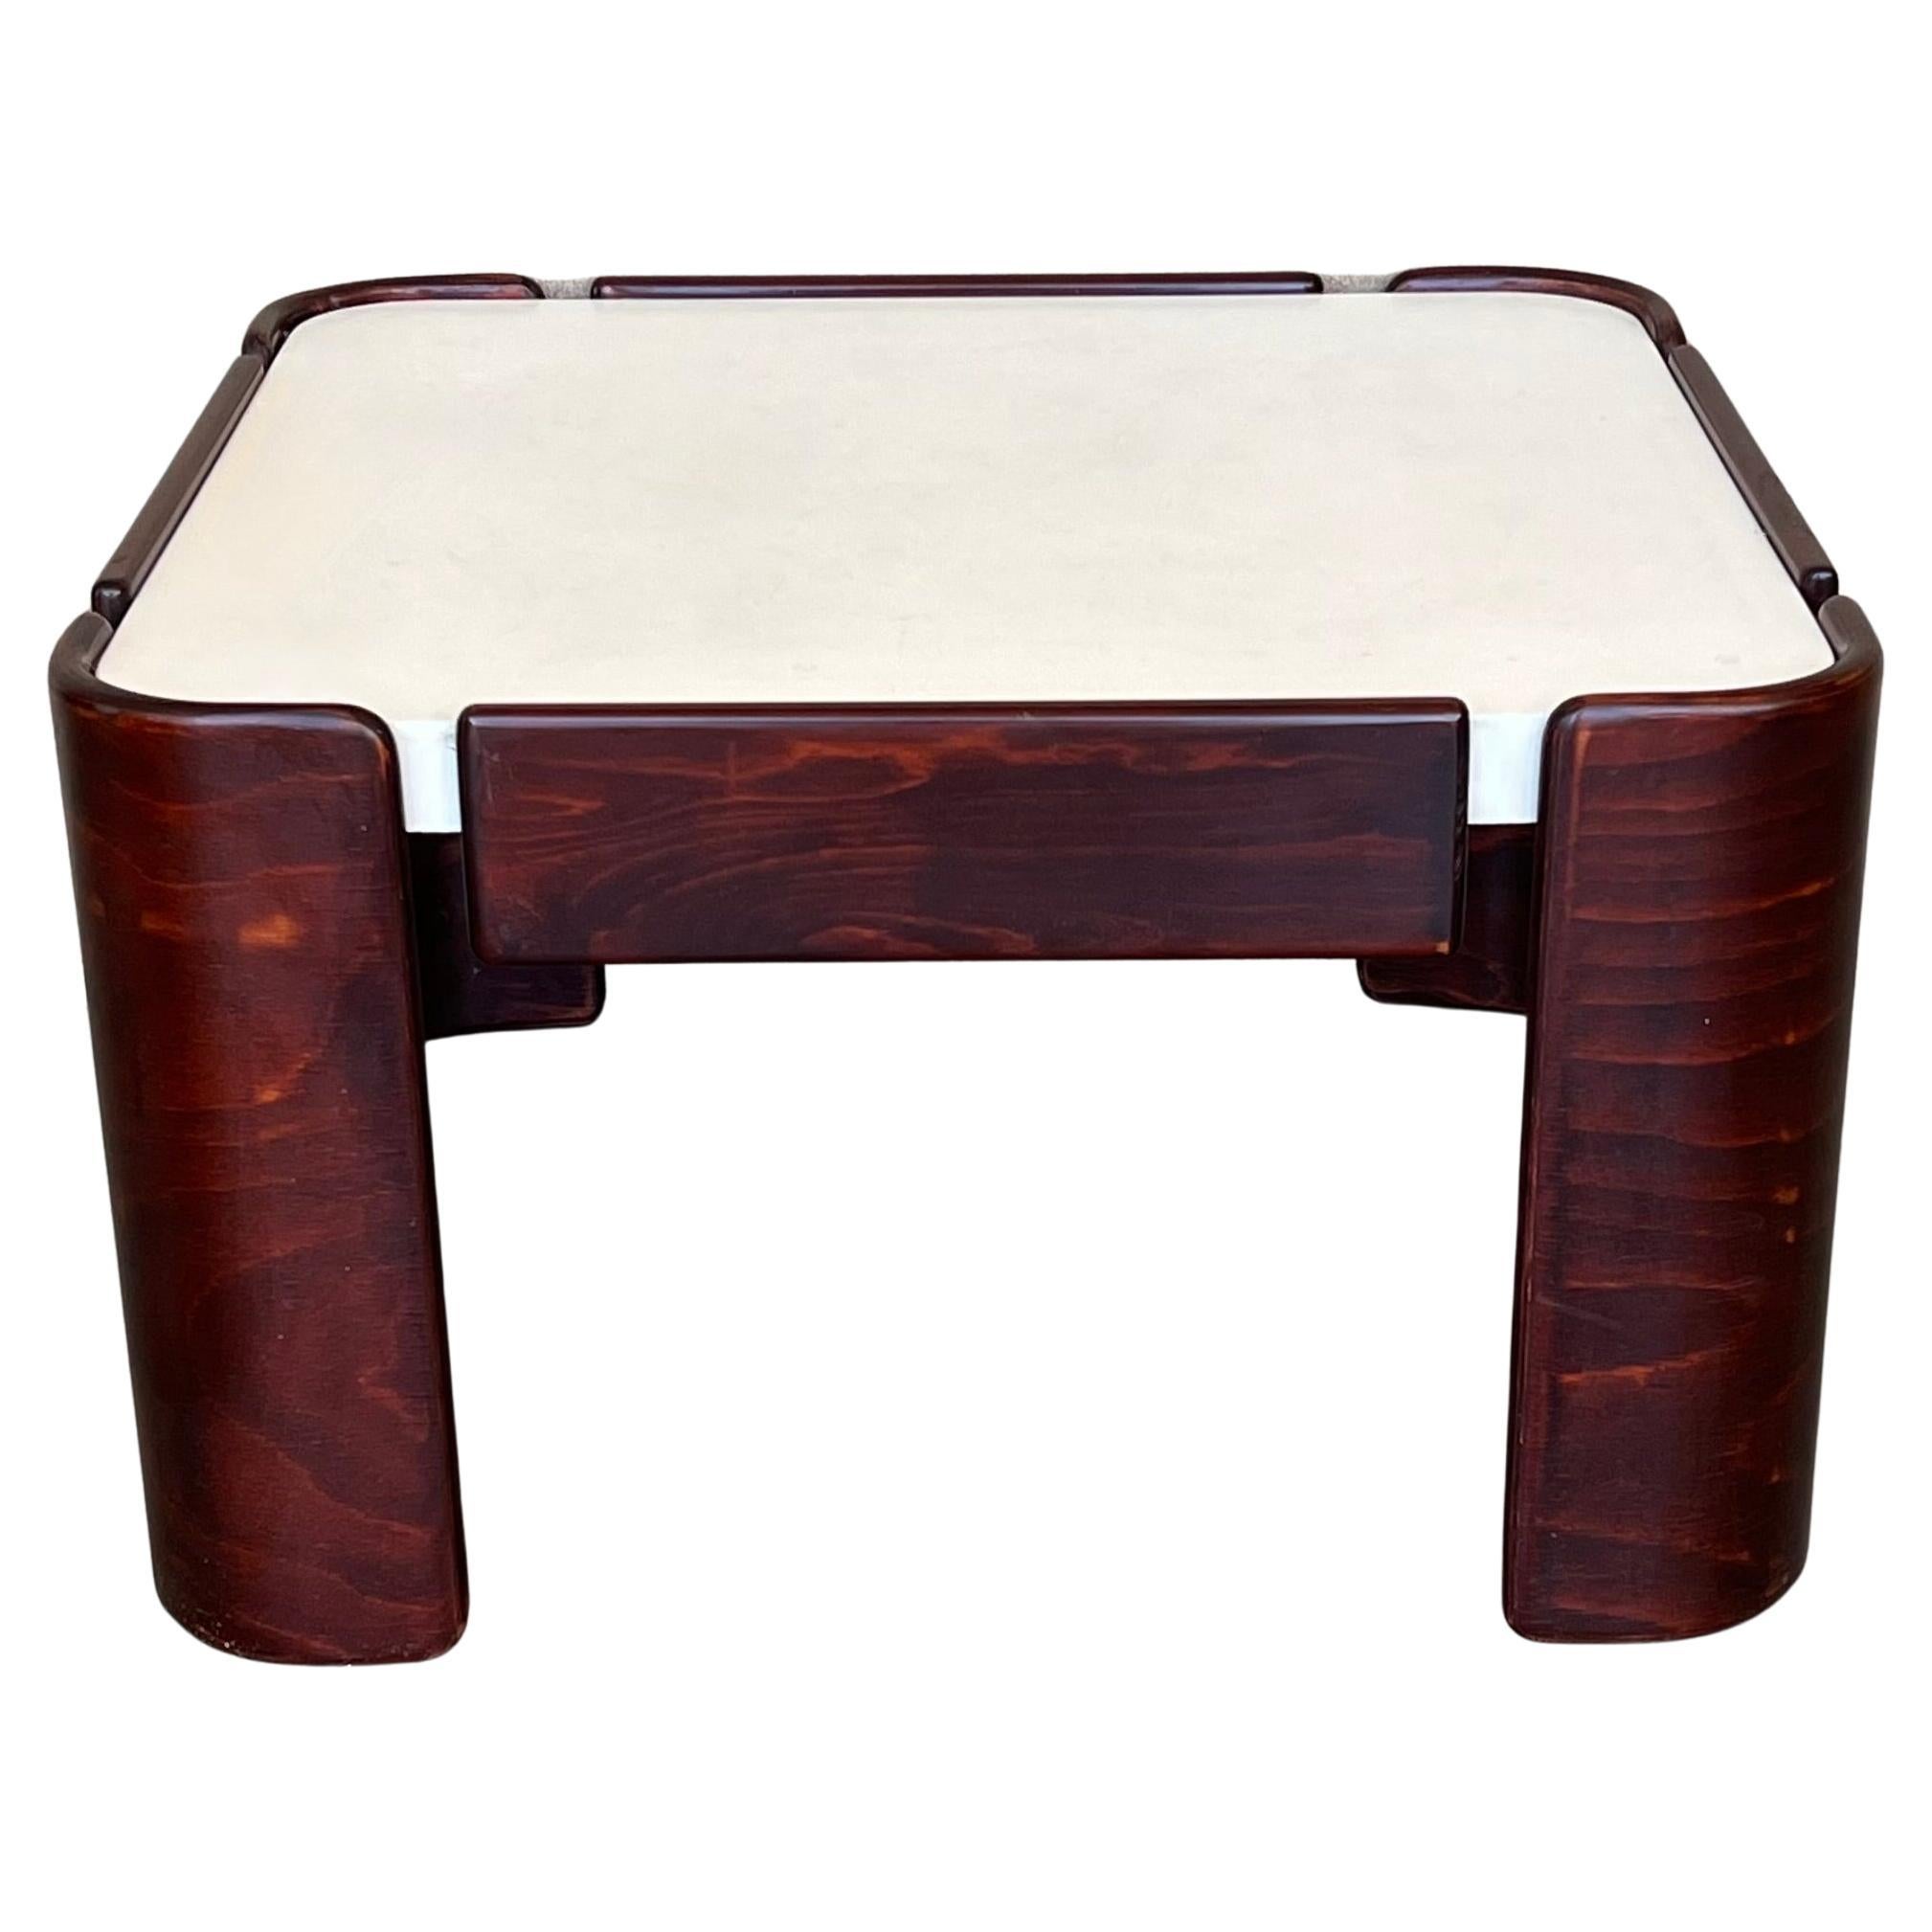 Mid-Century Modern Square Table with Curved Legs and White Top